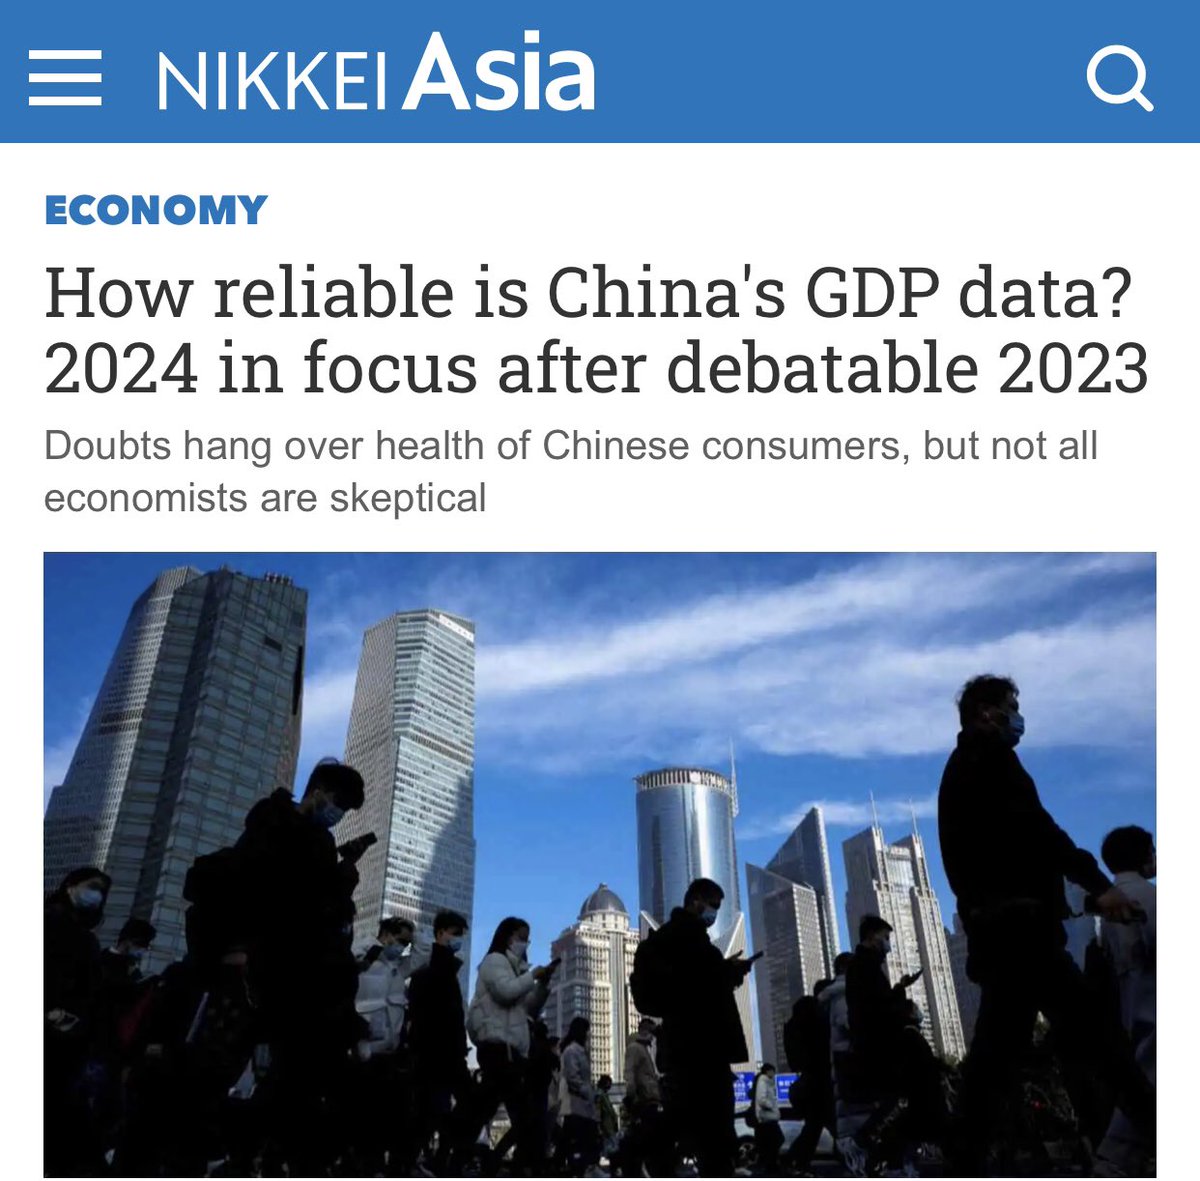 Research firm Rhodium Group estimated that China’s 2023 GDP growth is closer to 1.5% than the official 5.2%. Regardless of the accuracy of official data, the cost of the uncertainty and Beijing's perceived lack of transparency falls mostly on China itself. 'Policymakers can't…